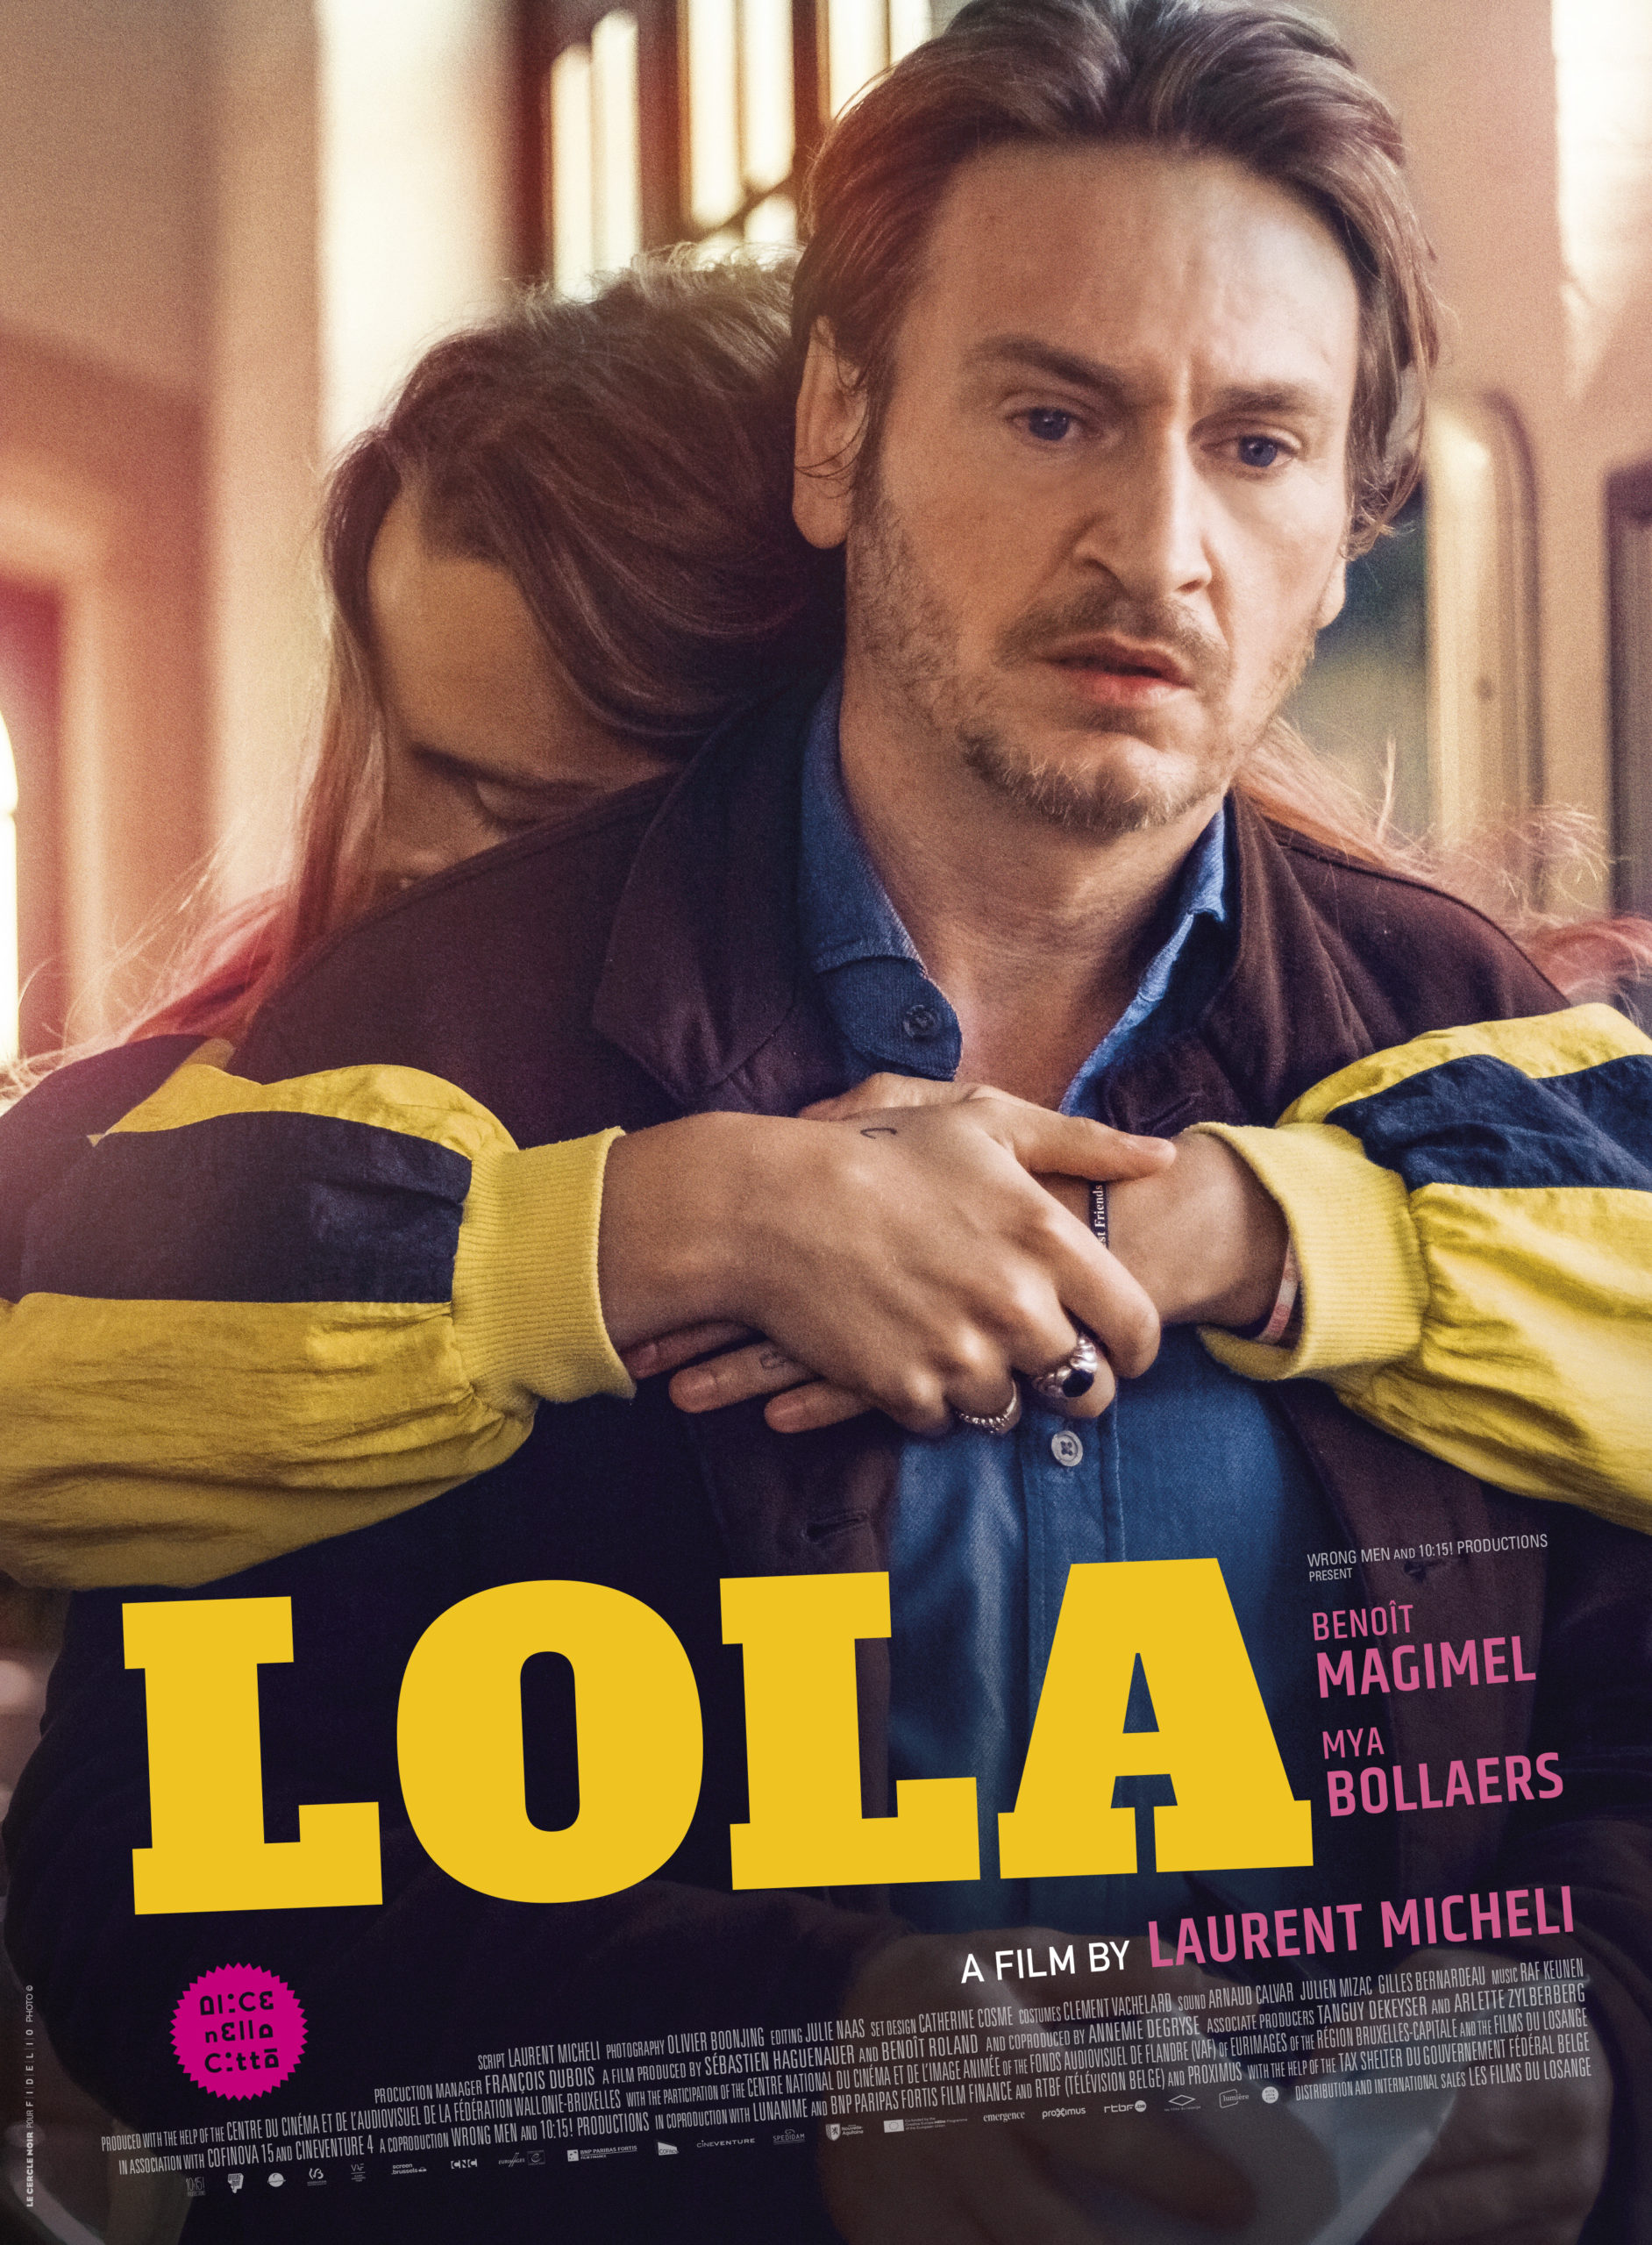 Poster for the film Lola